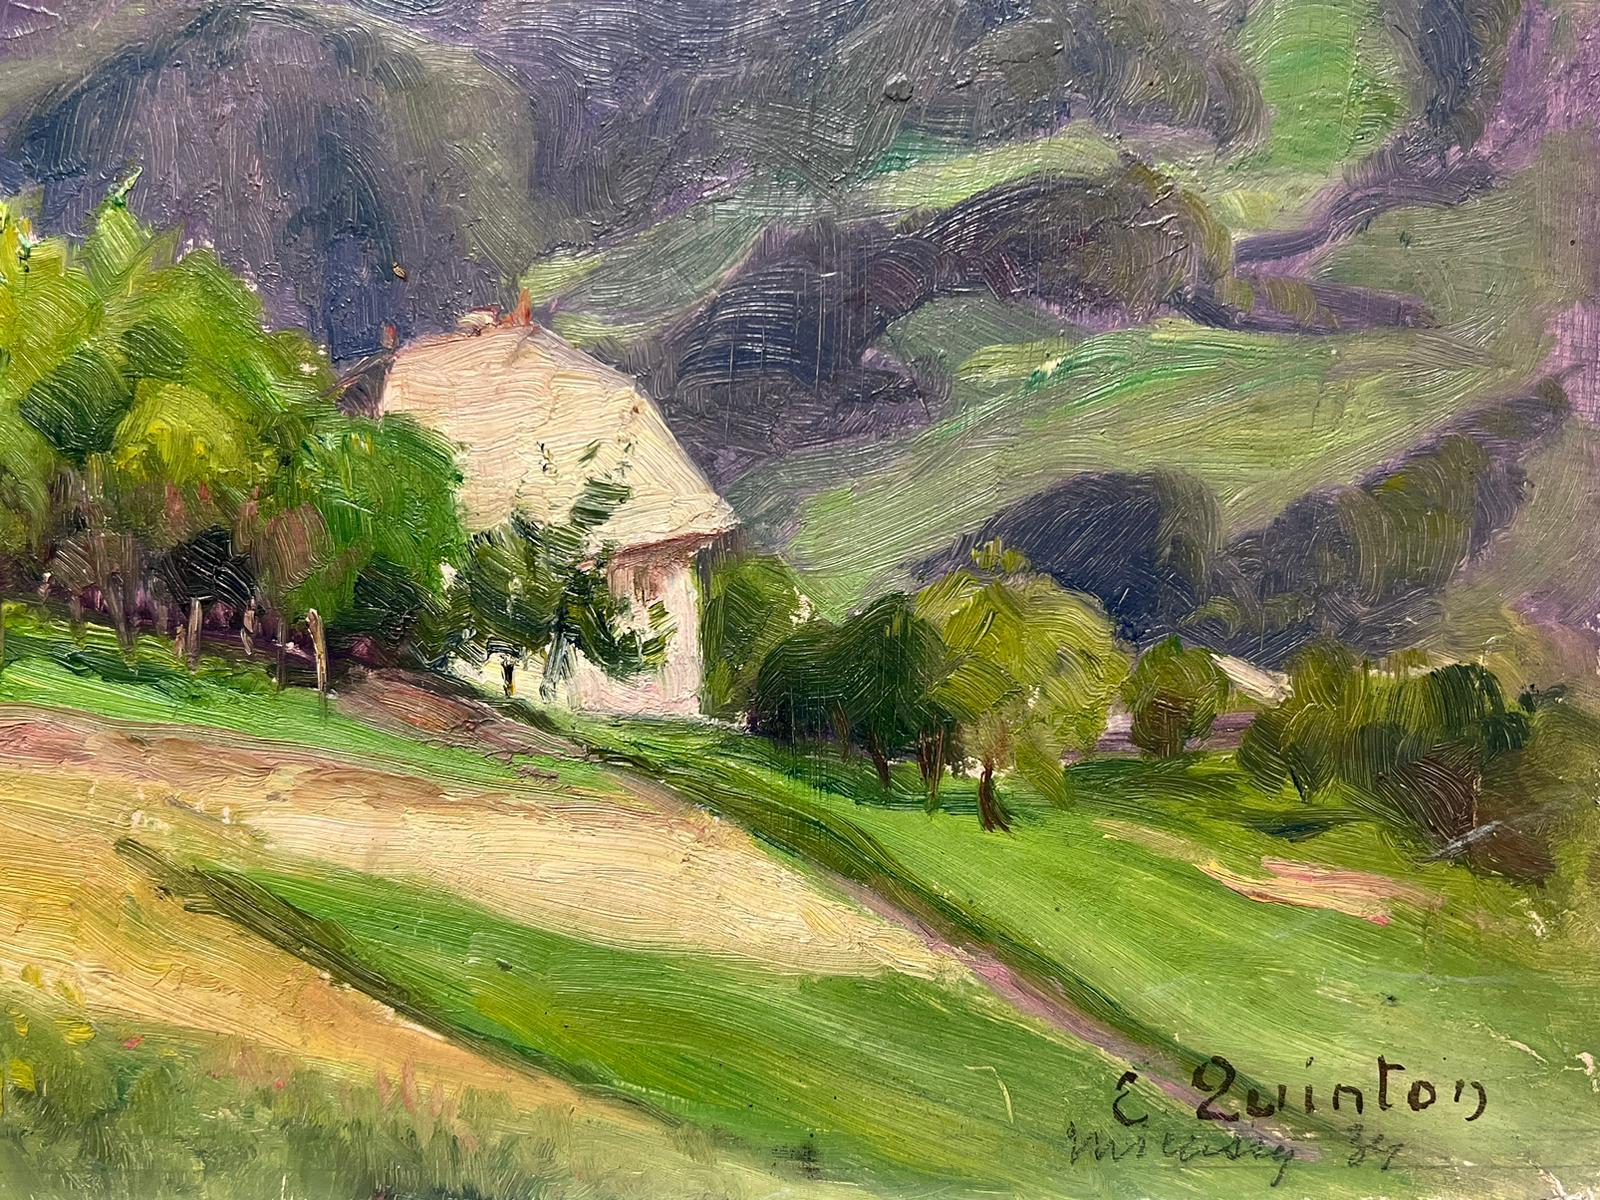 French Countryside Landscape
by Edmond Quinton (French 1892-1969) *see notes below
signed lower front corner
oil painting on board/ panel, unframed
size: 10 x 13 inches
condition: overall good and sound, some age related marks and old dirt, all four